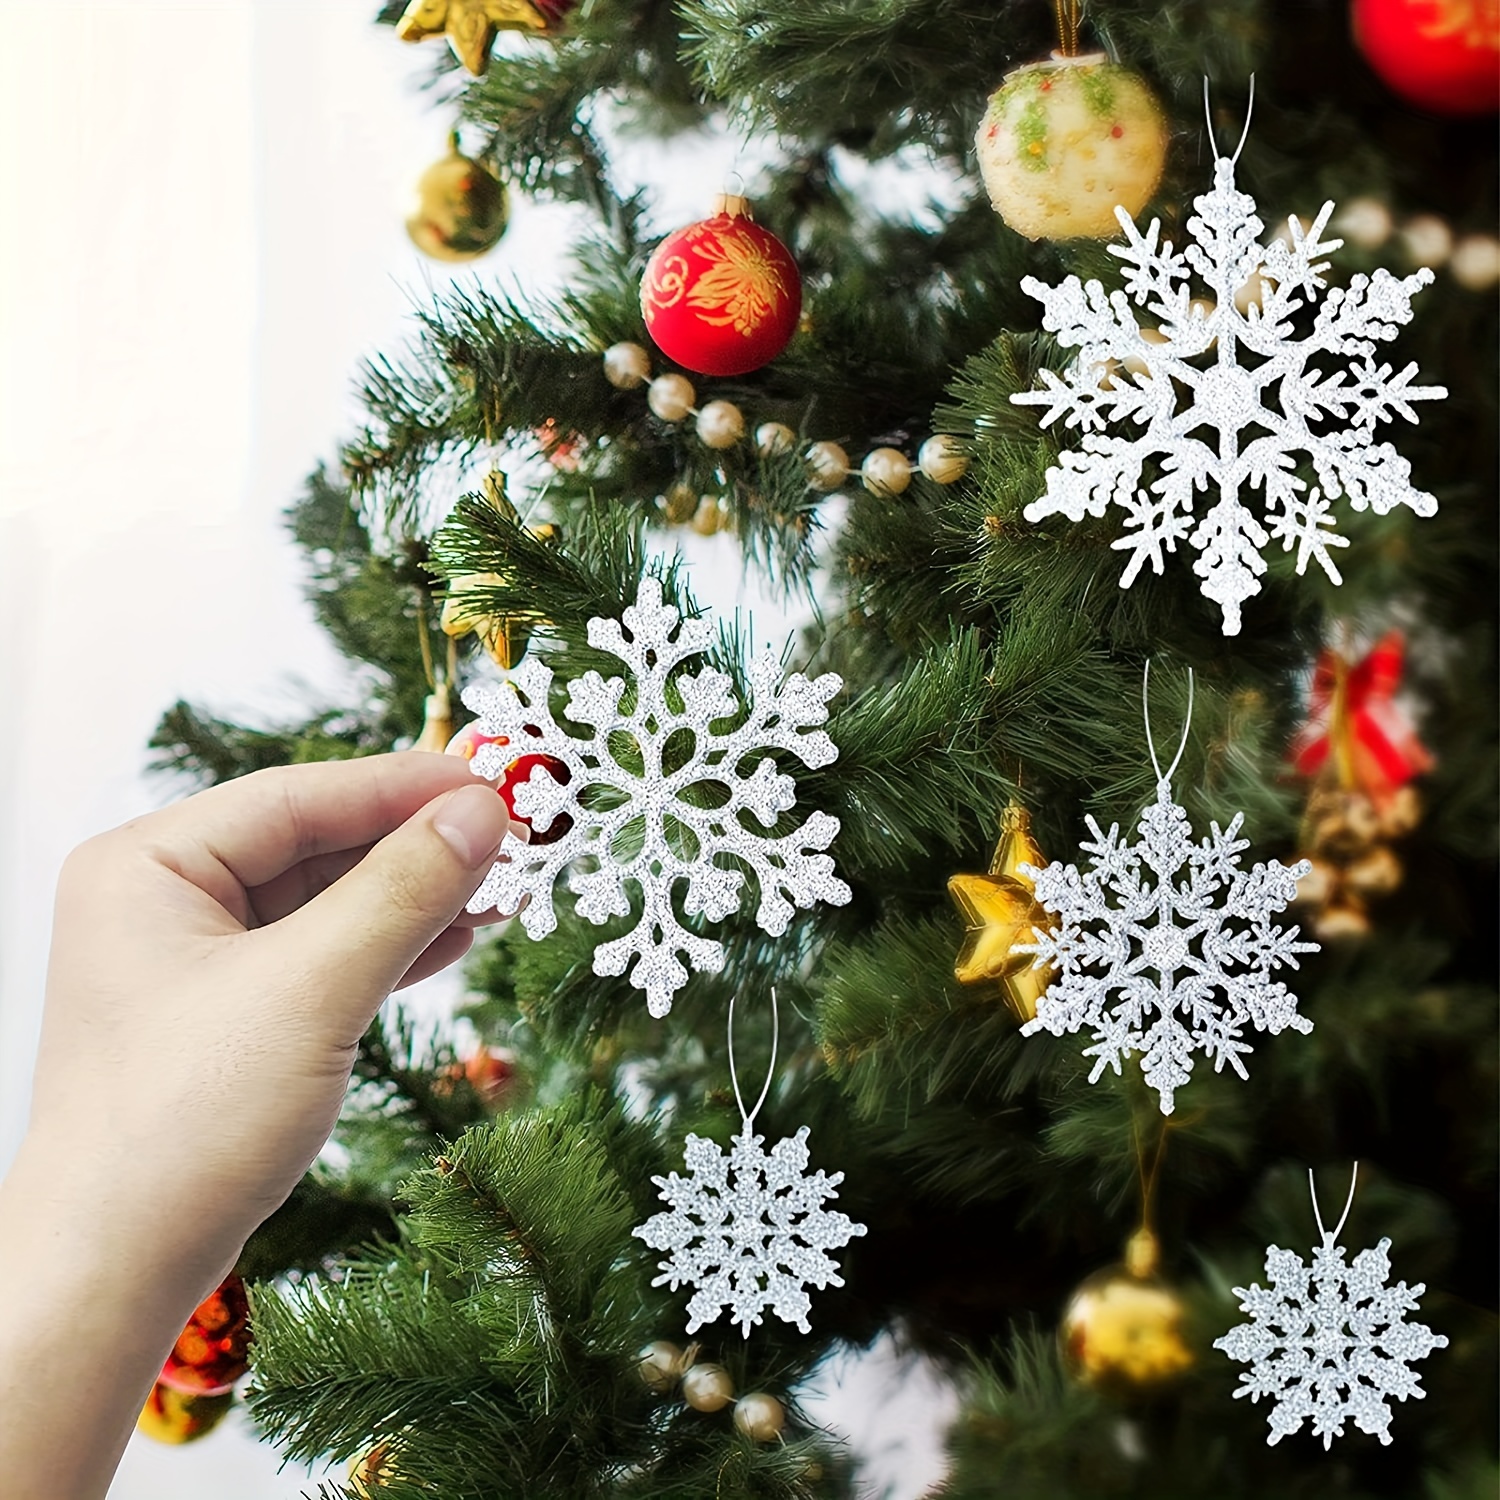 46 Pcs White Glitter Snowflake Ornaments Various Size Plastic Winter  Snowflakes Ornaments Christmas Tree Decorations with Silver Rope for Winter